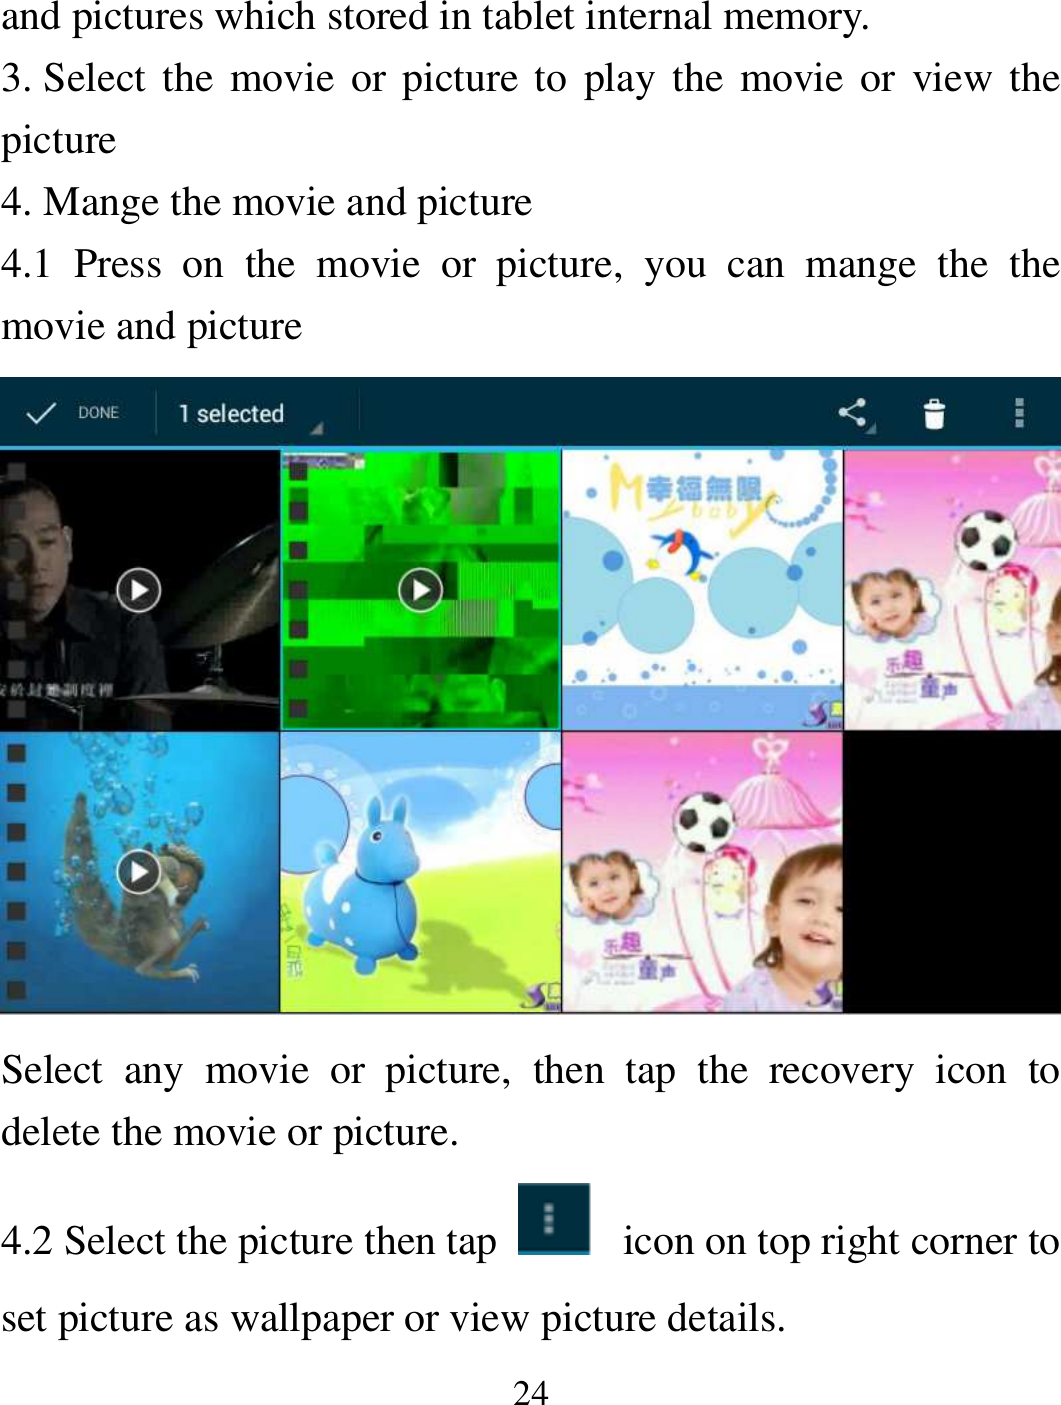   24 and pictures which stored in tablet internal memory. 3. Select  the  movie or  picture to play the movie or view  the picture 4. Mange the movie and picture 4.1  Press  on  the  movie  or  picture,  you  can  mange  the  the movie and picture  Select  any  movie  or  picture,  then  tap  the  recovery  icon  to delete the movie or picture. 4.2 Select the picture then tap    icon on top right corner to set picture as wallpaper or view picture details. 